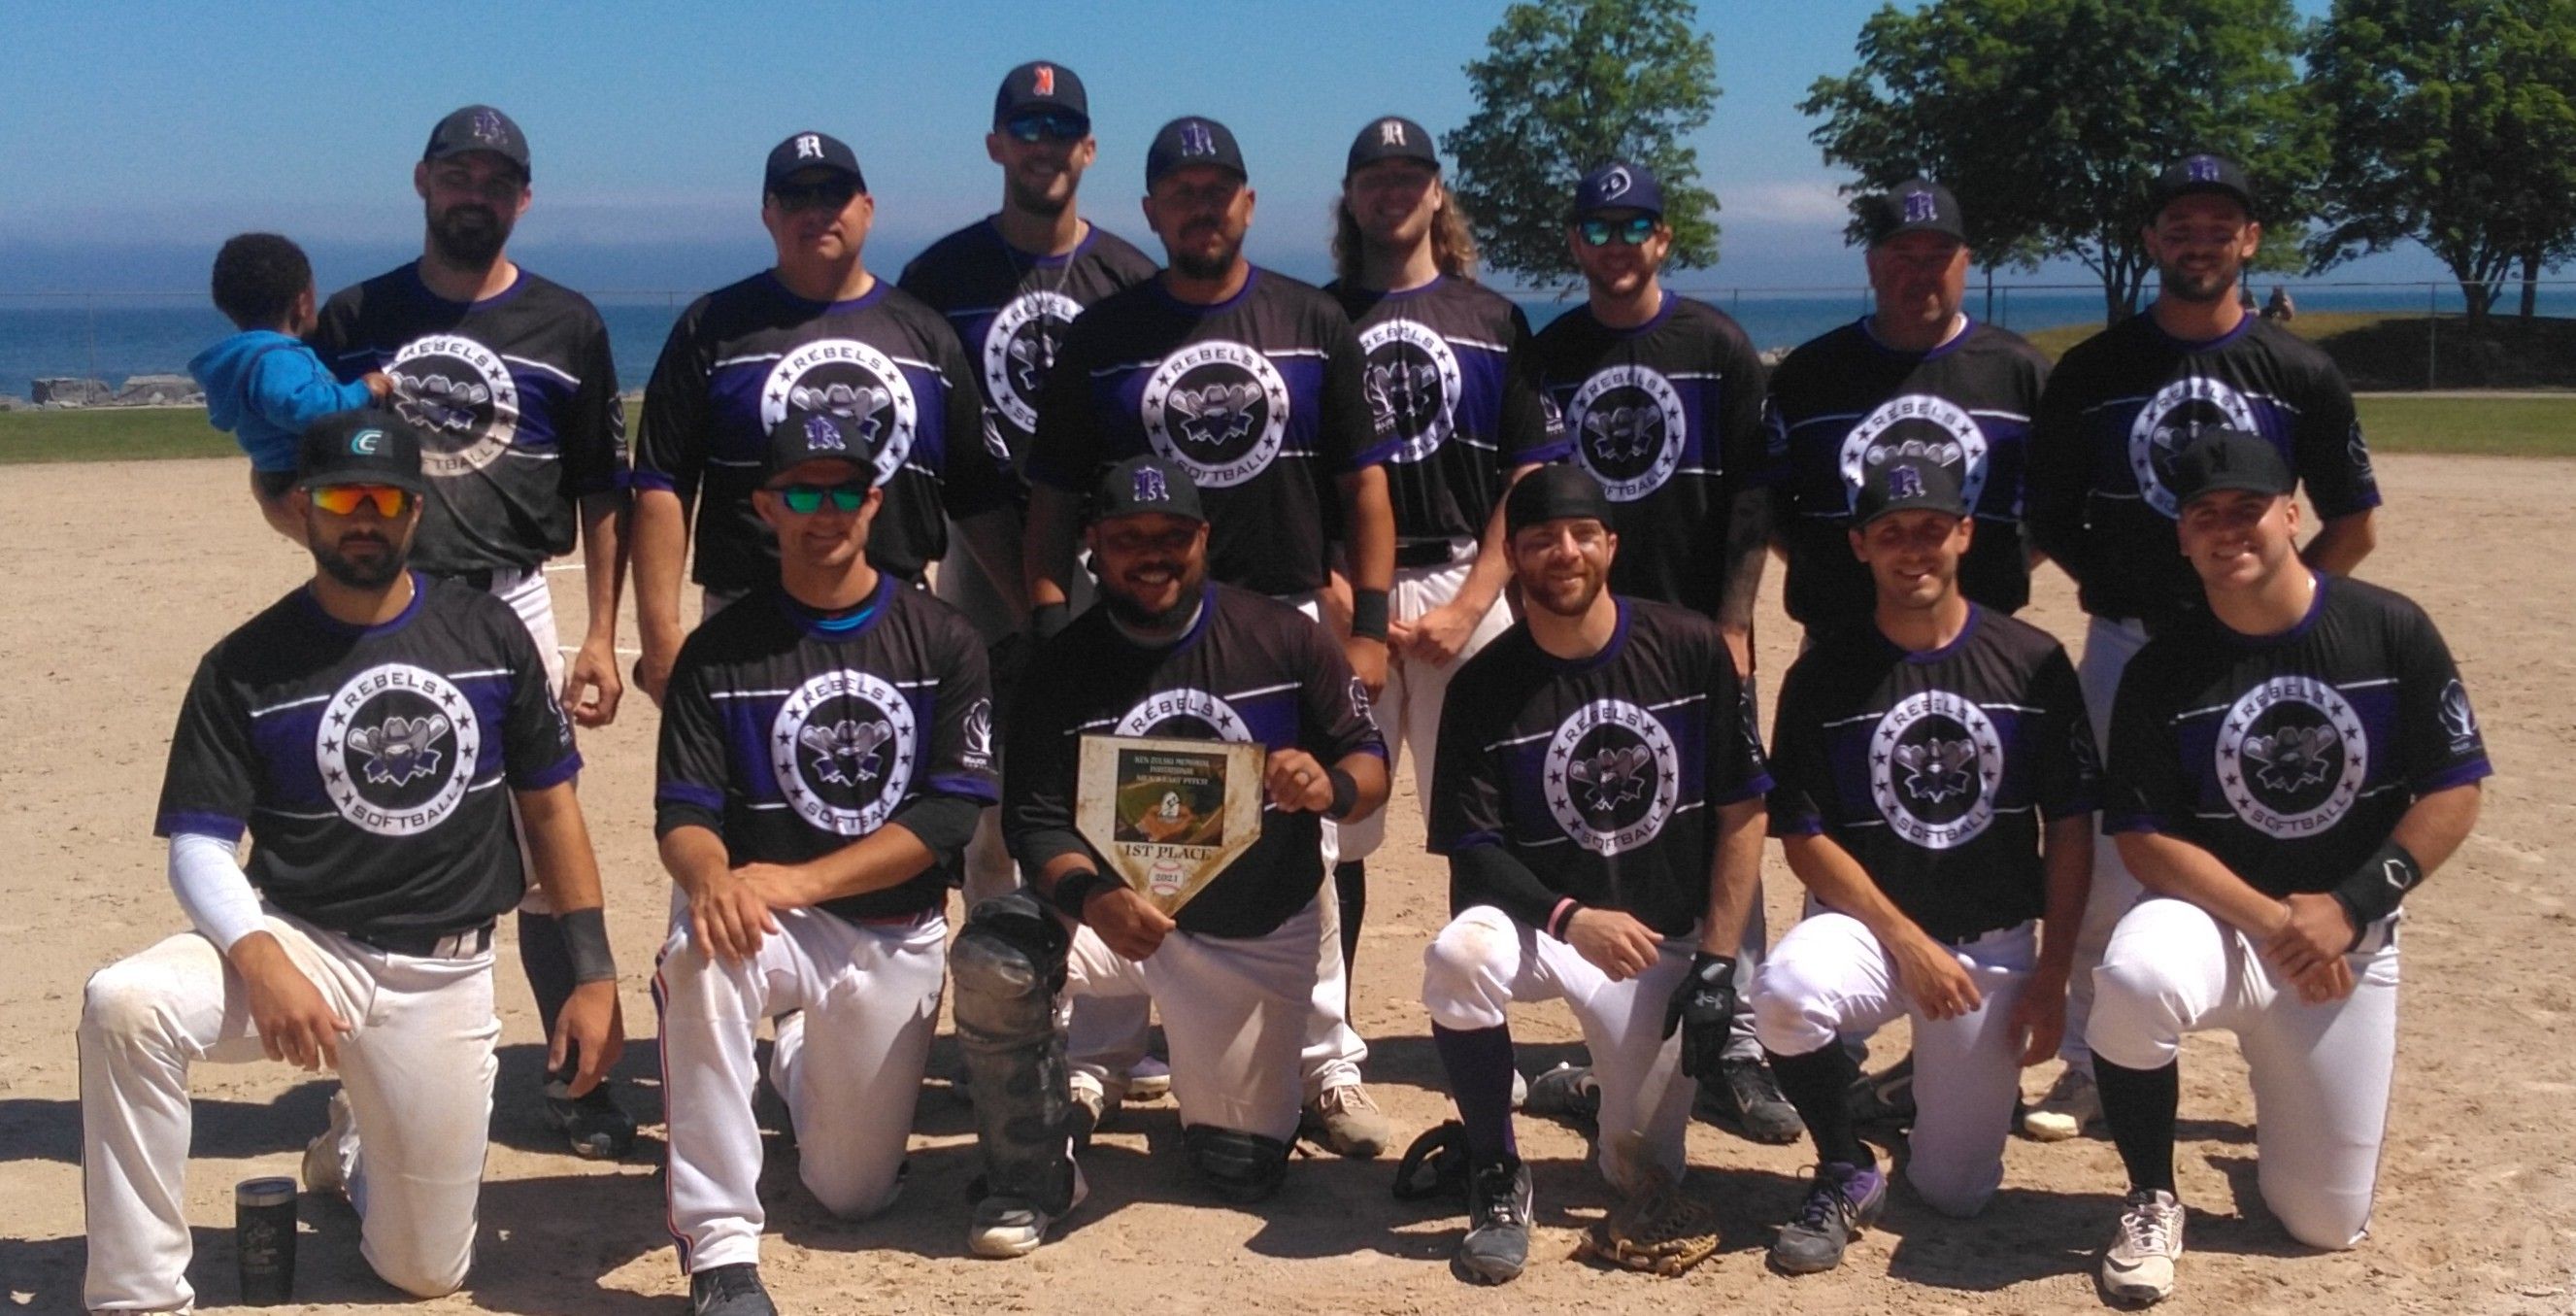 Champion – Rebels from Port Huron